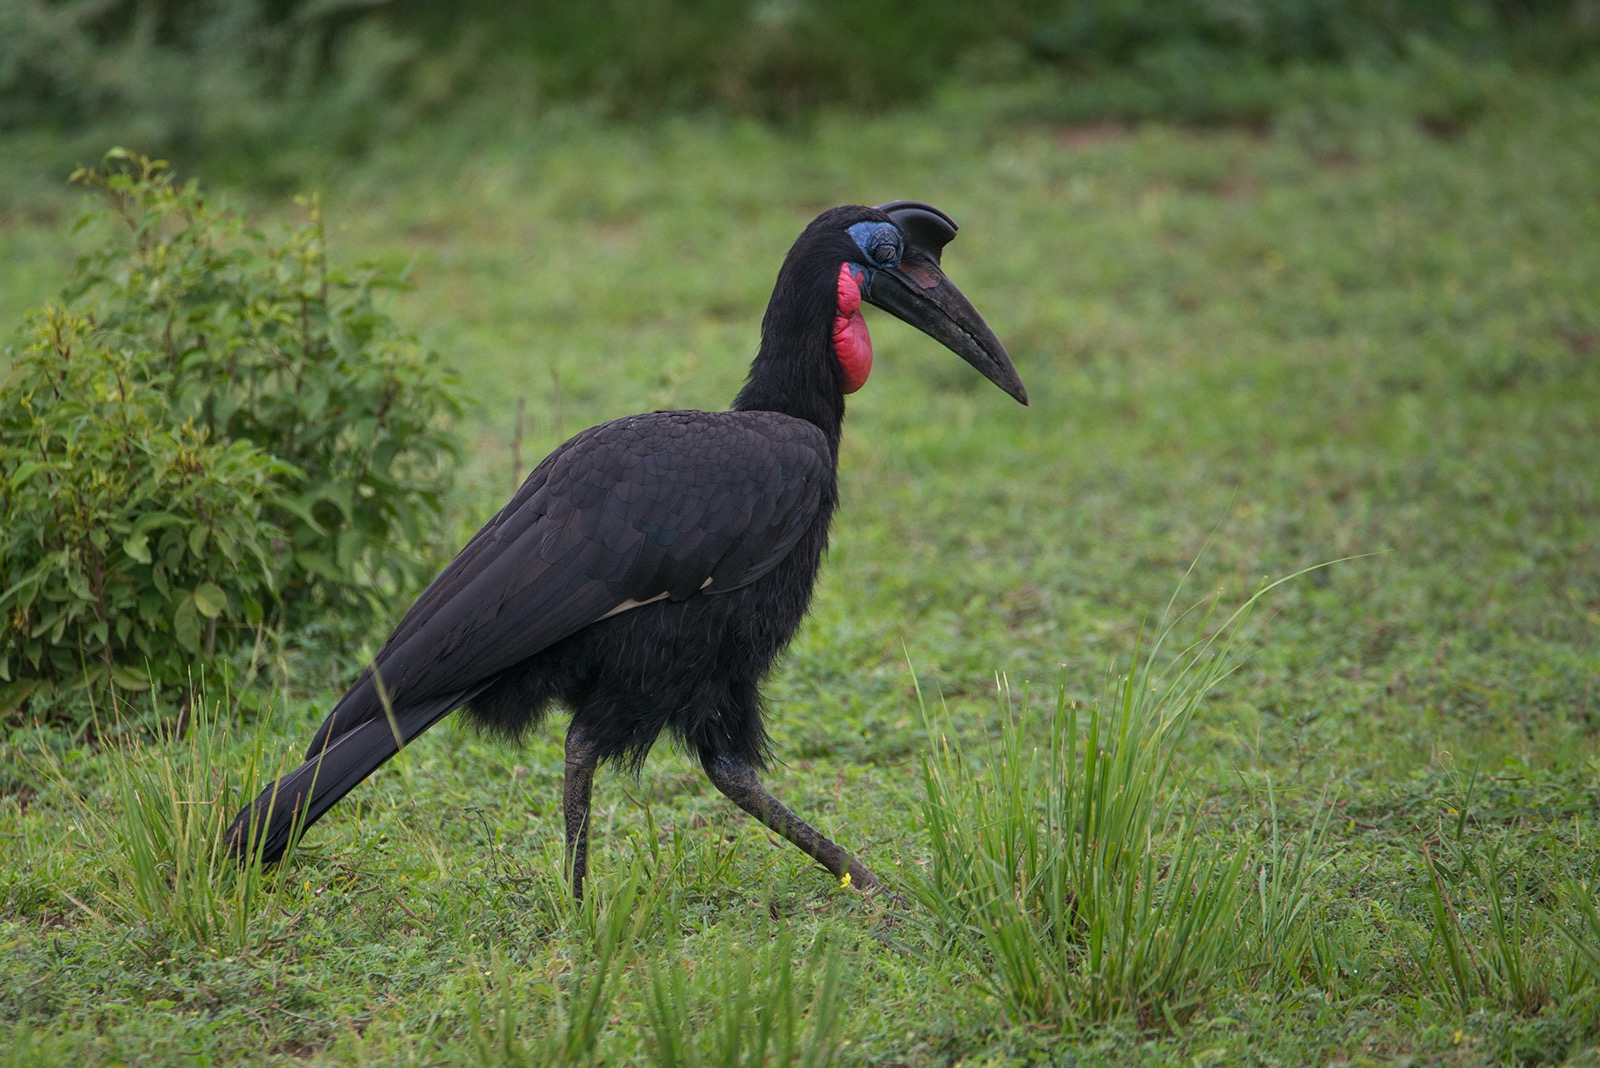 An Abyssinian ground hornbill walks slowly while looking for potential prey in Murchison Falls National Park